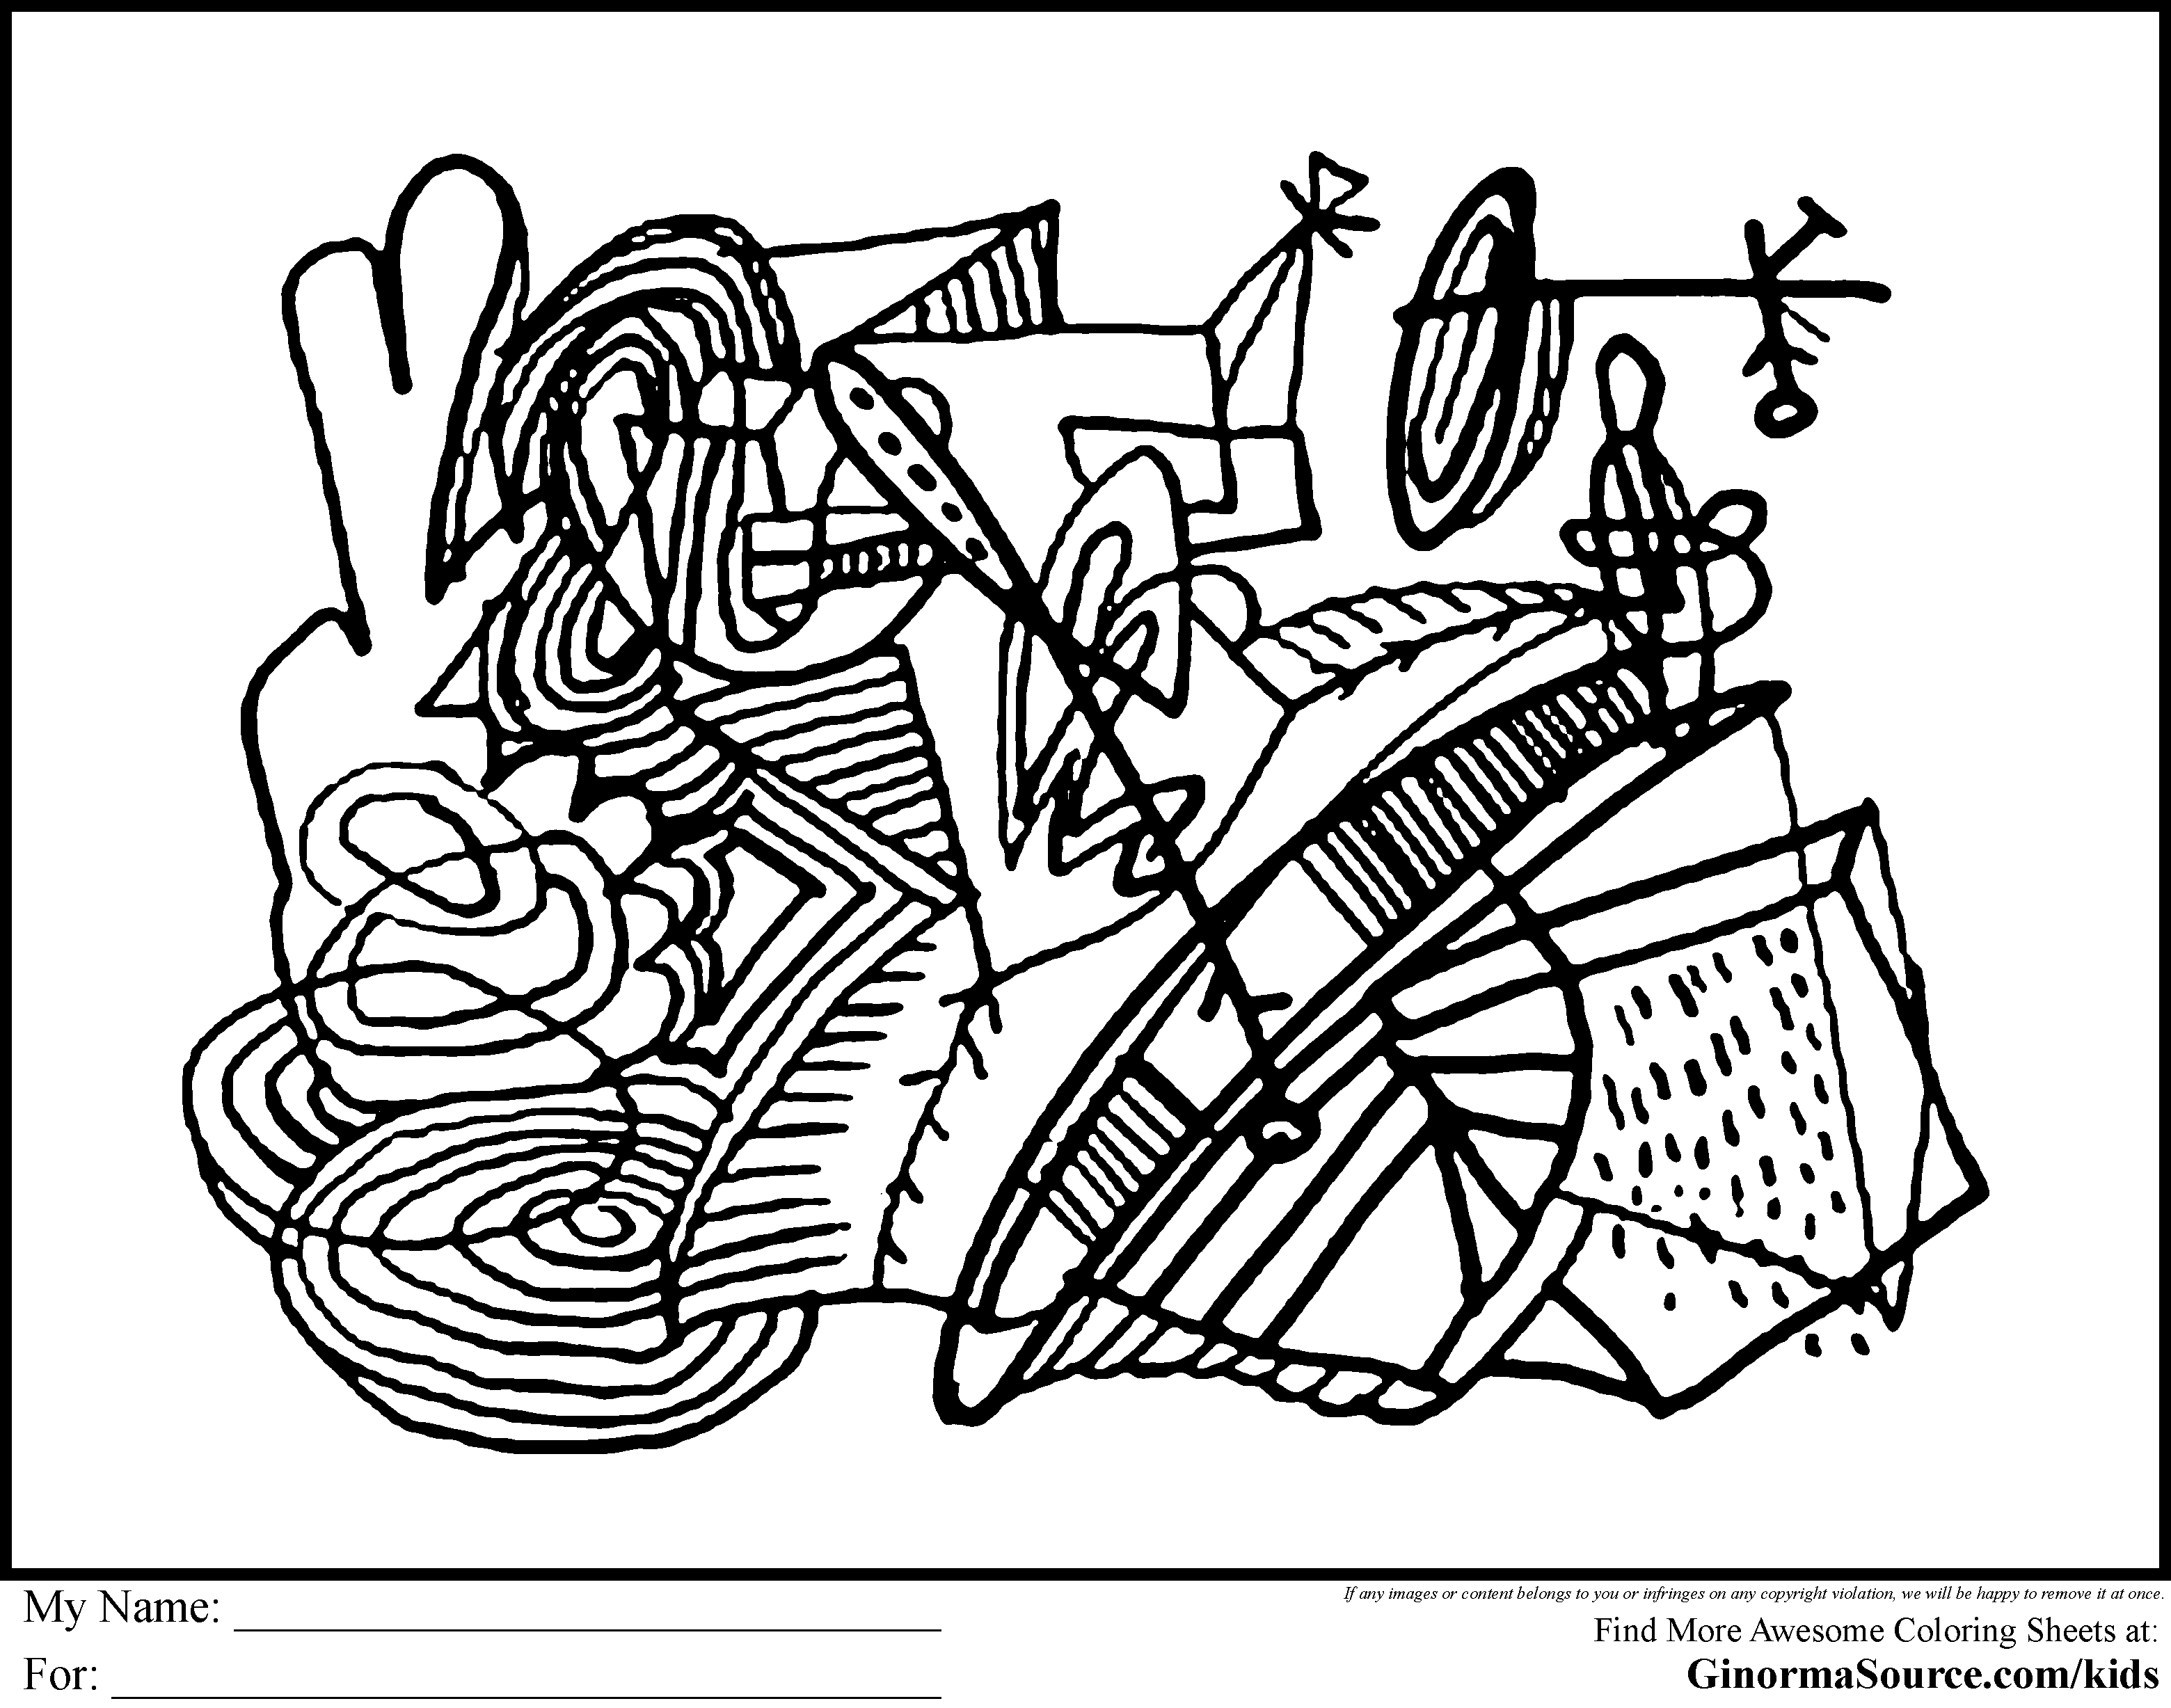 Free coloring pages of self-expression